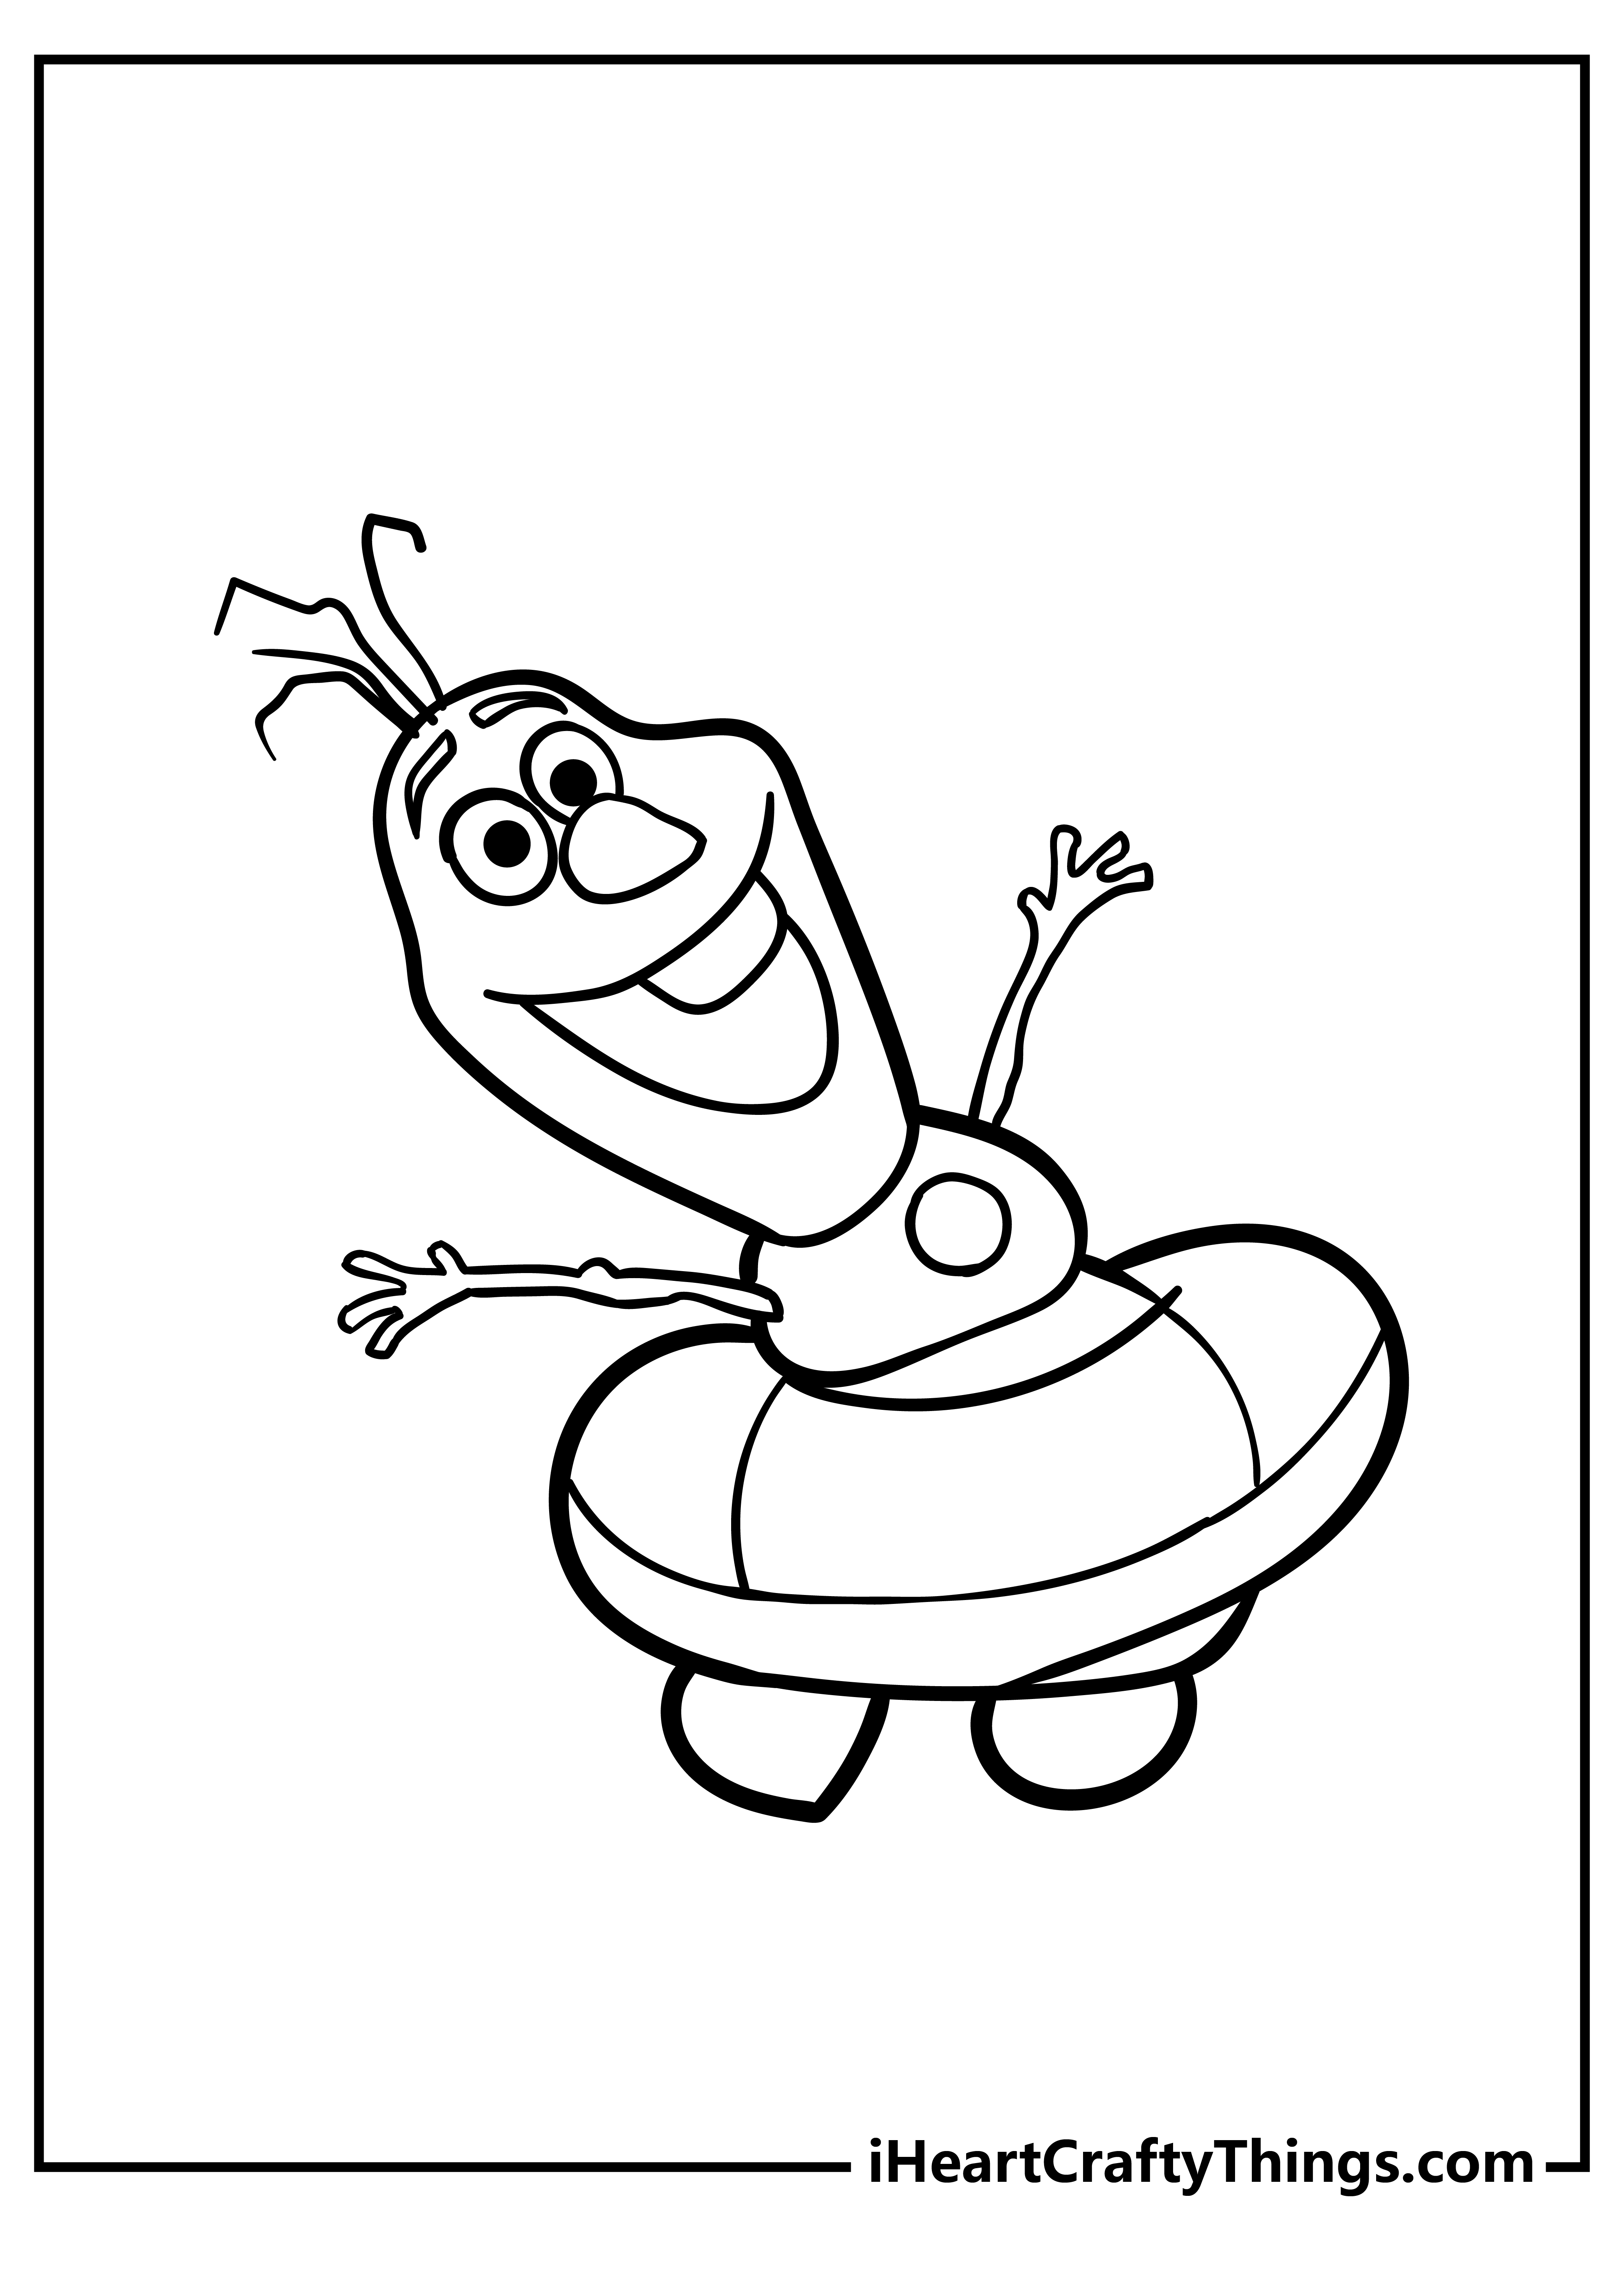 Olaf Coloring Pages for preschoolers free printable